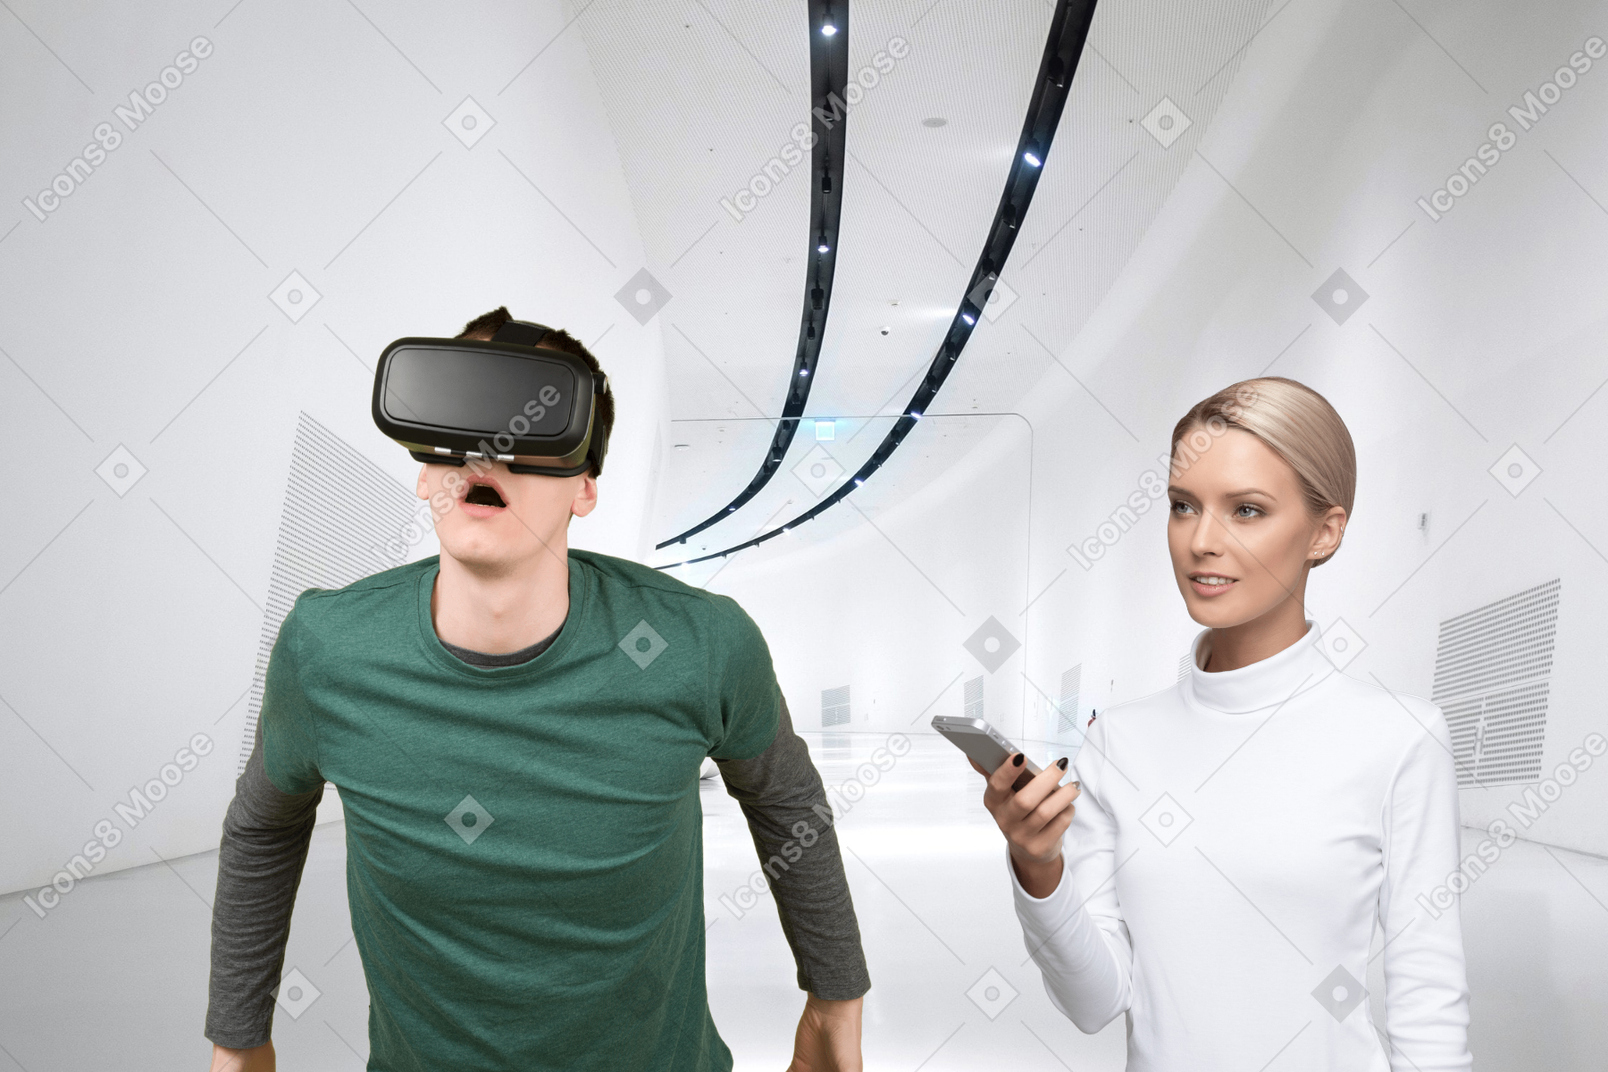 Thrilled by virtual reality